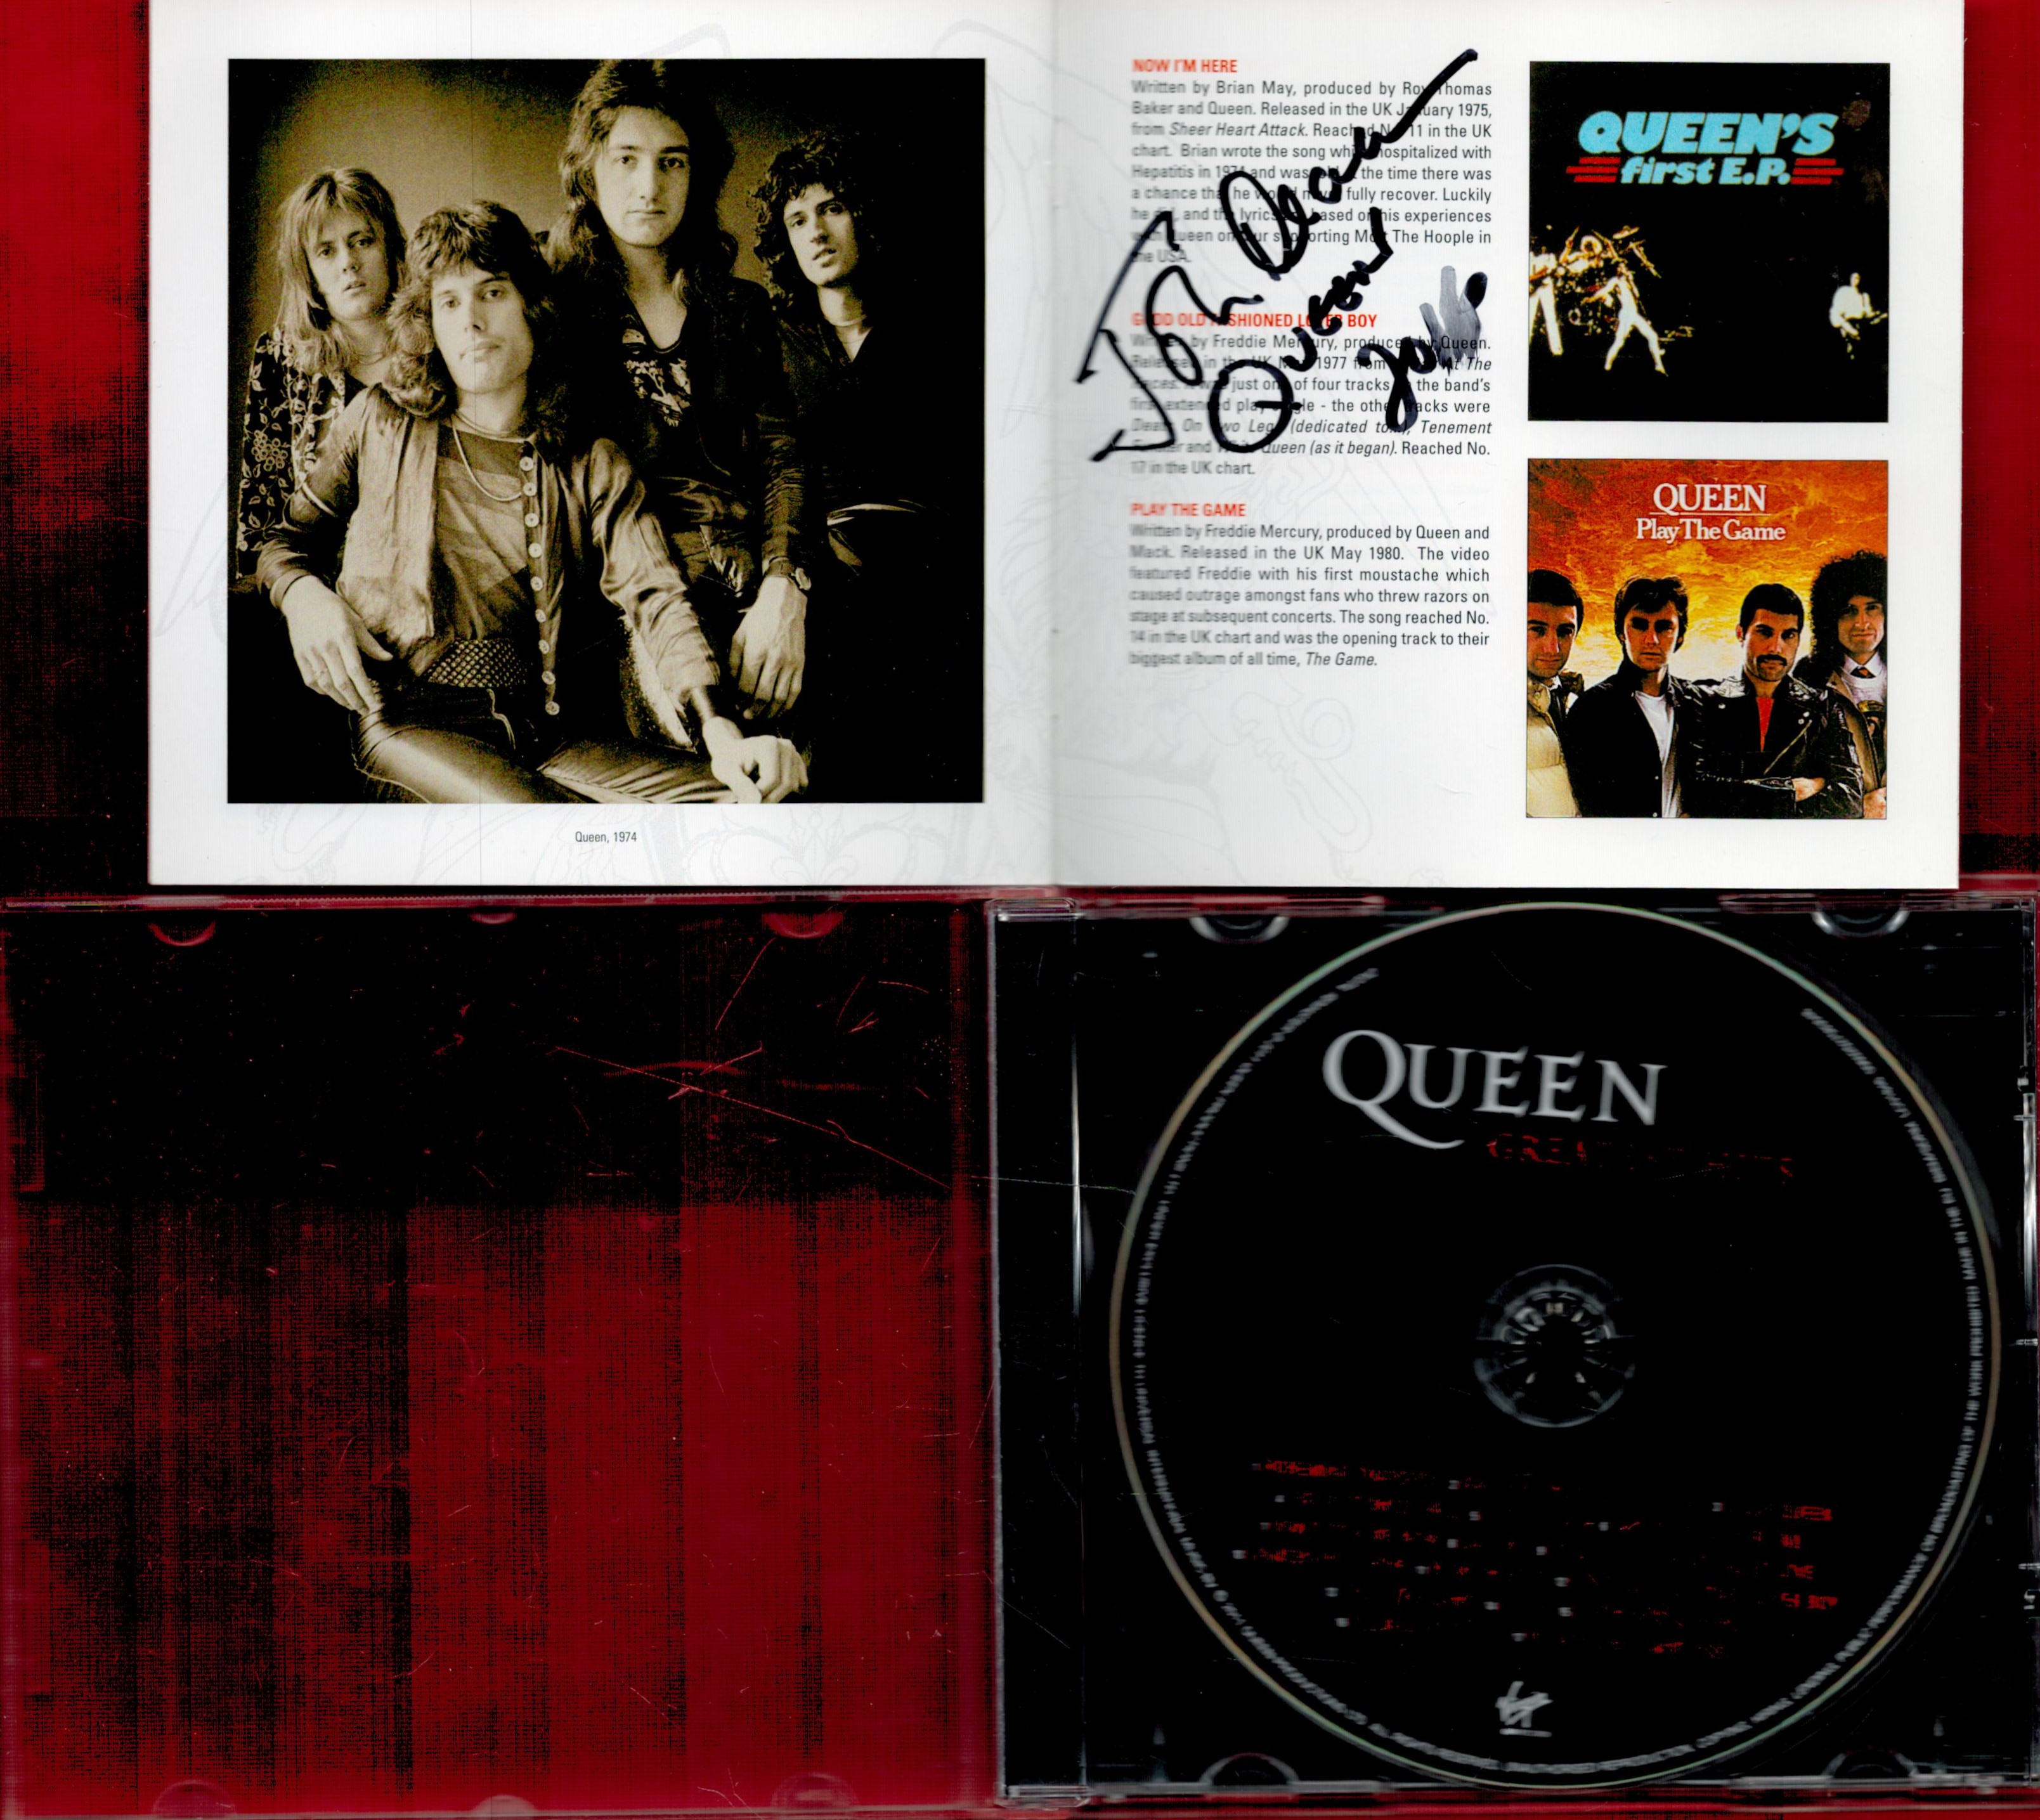 Queen Greatest Hits Cd Signed Inside Brochure By John Deacon. Good Condition. All autographs come